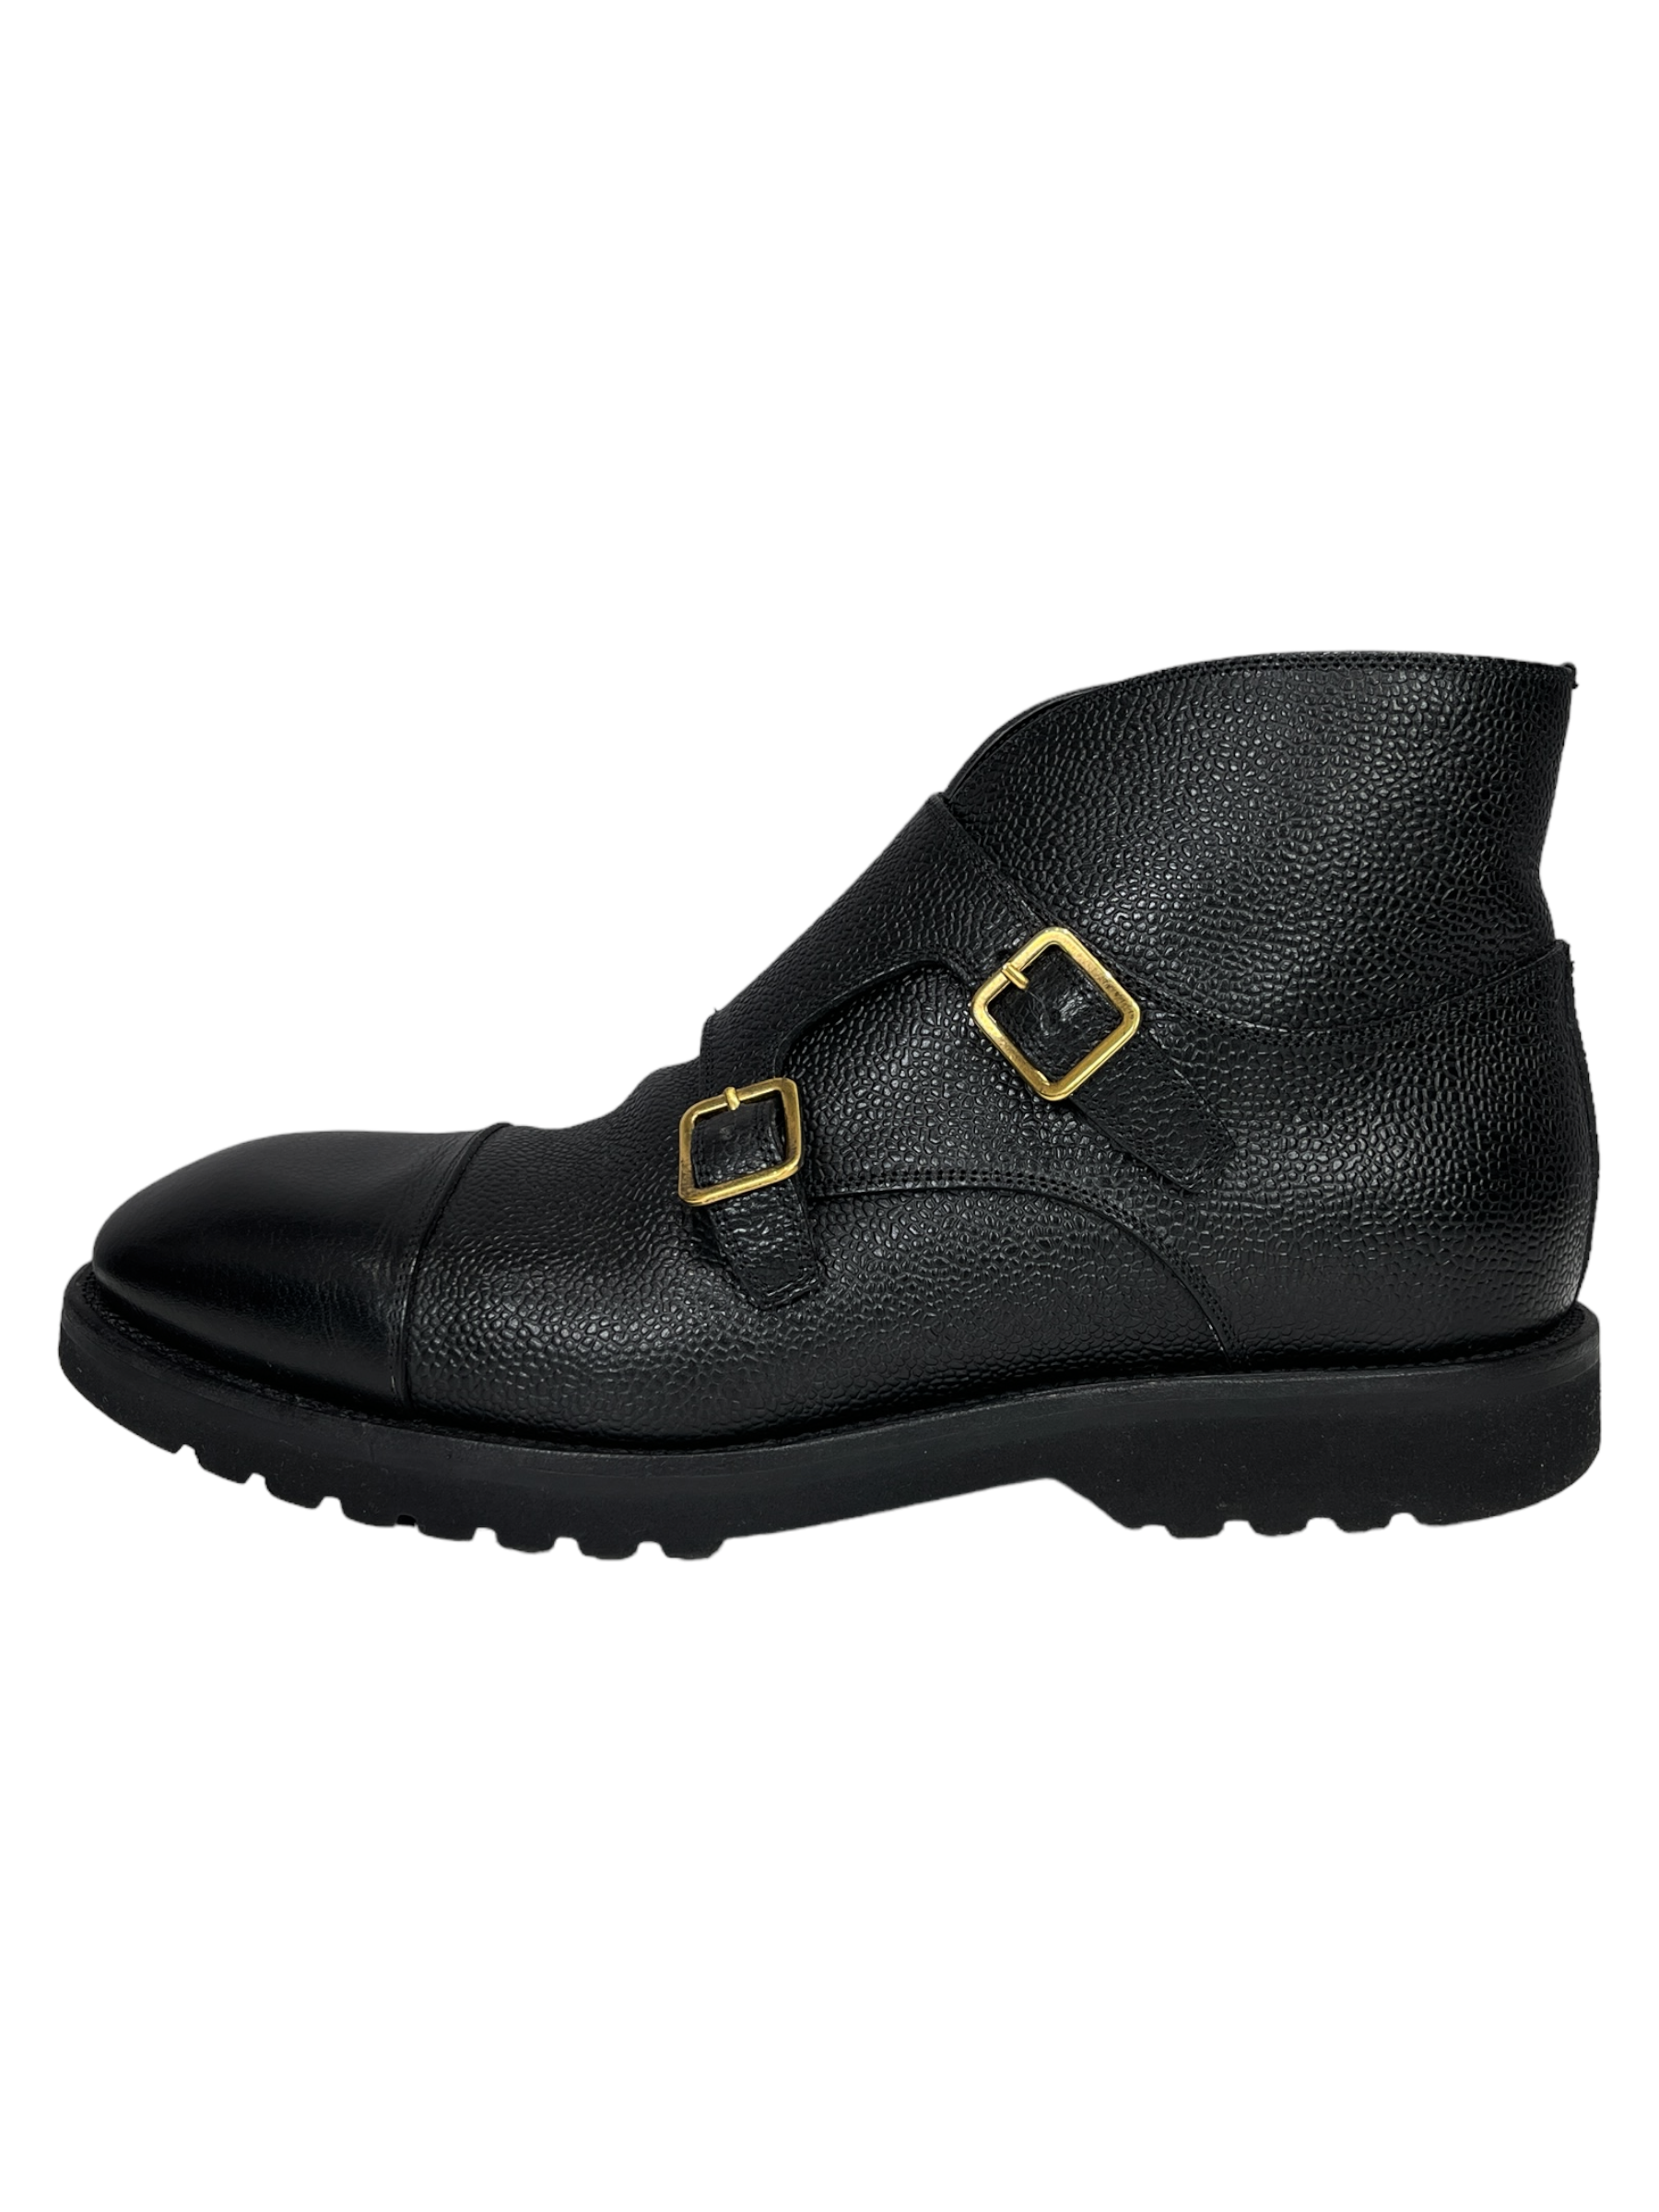 Tom Ford Black Pebbled Leather Strap Low Top Boot 7- Genuine Design Luxury Consignment Calgary, Alberta, Canada New and Pre-Owned Clothing, Shoes, Accessories.